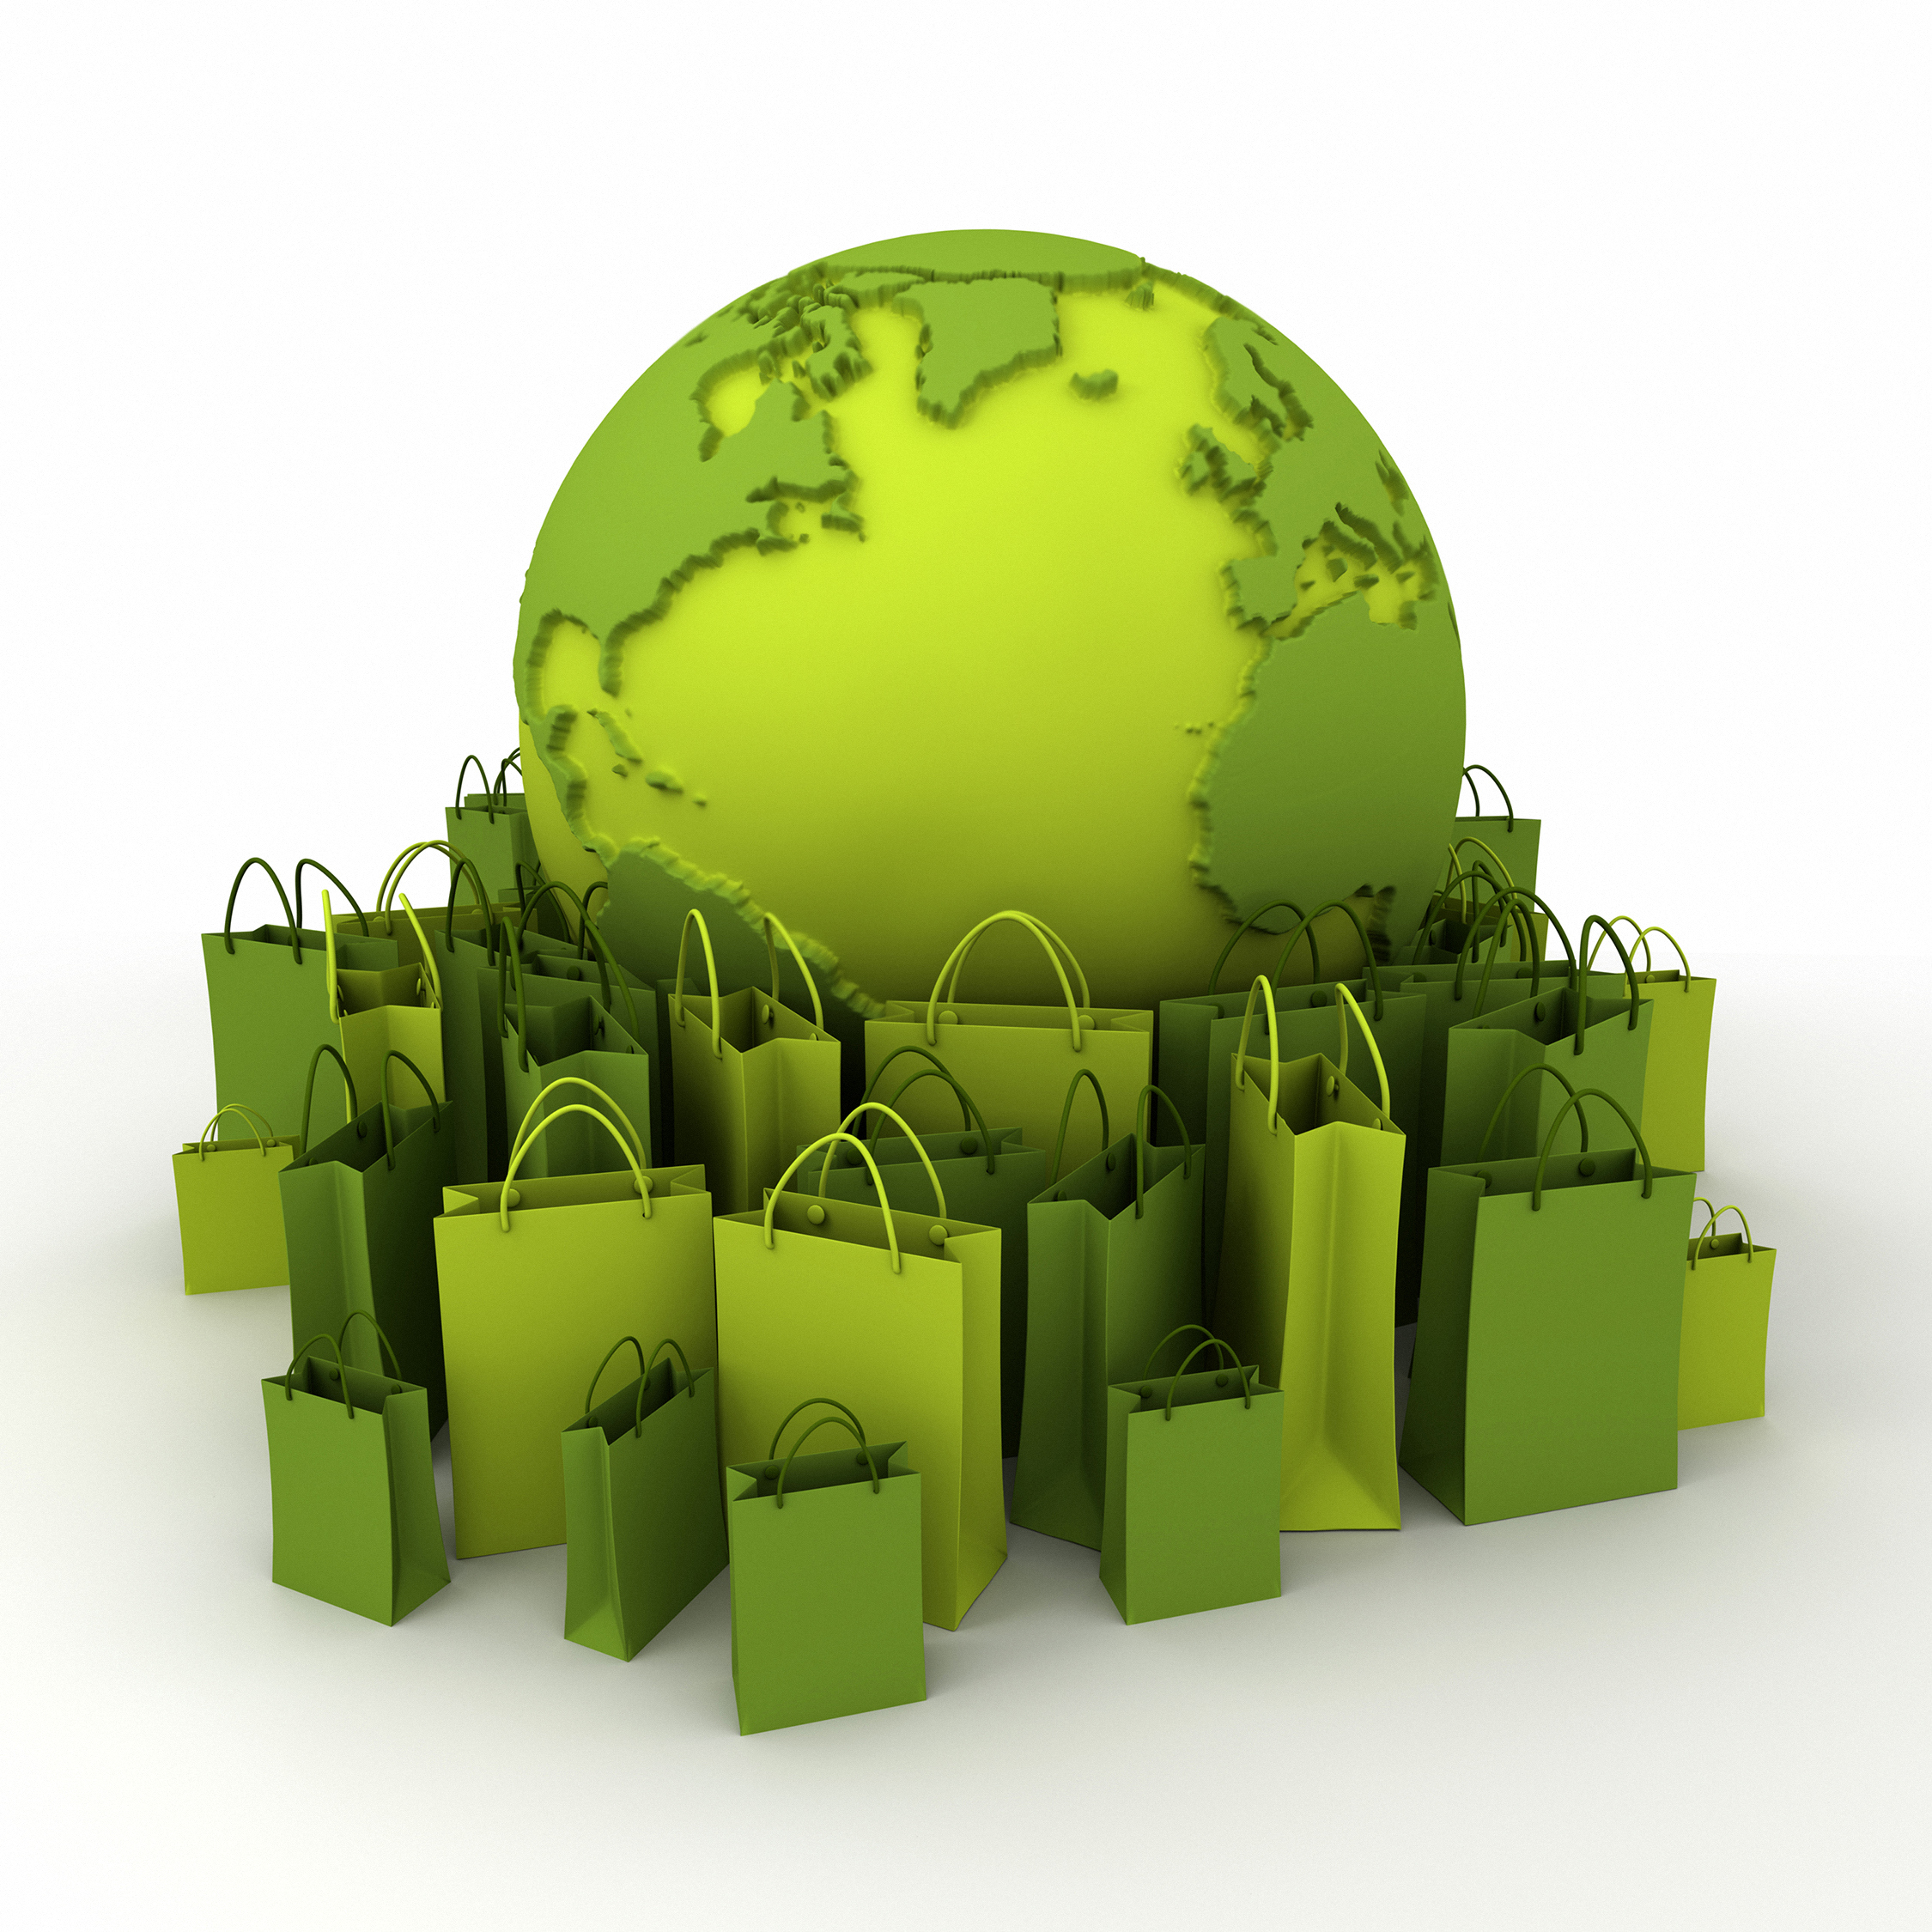 World globe surrounded by shopping bags in green shades.